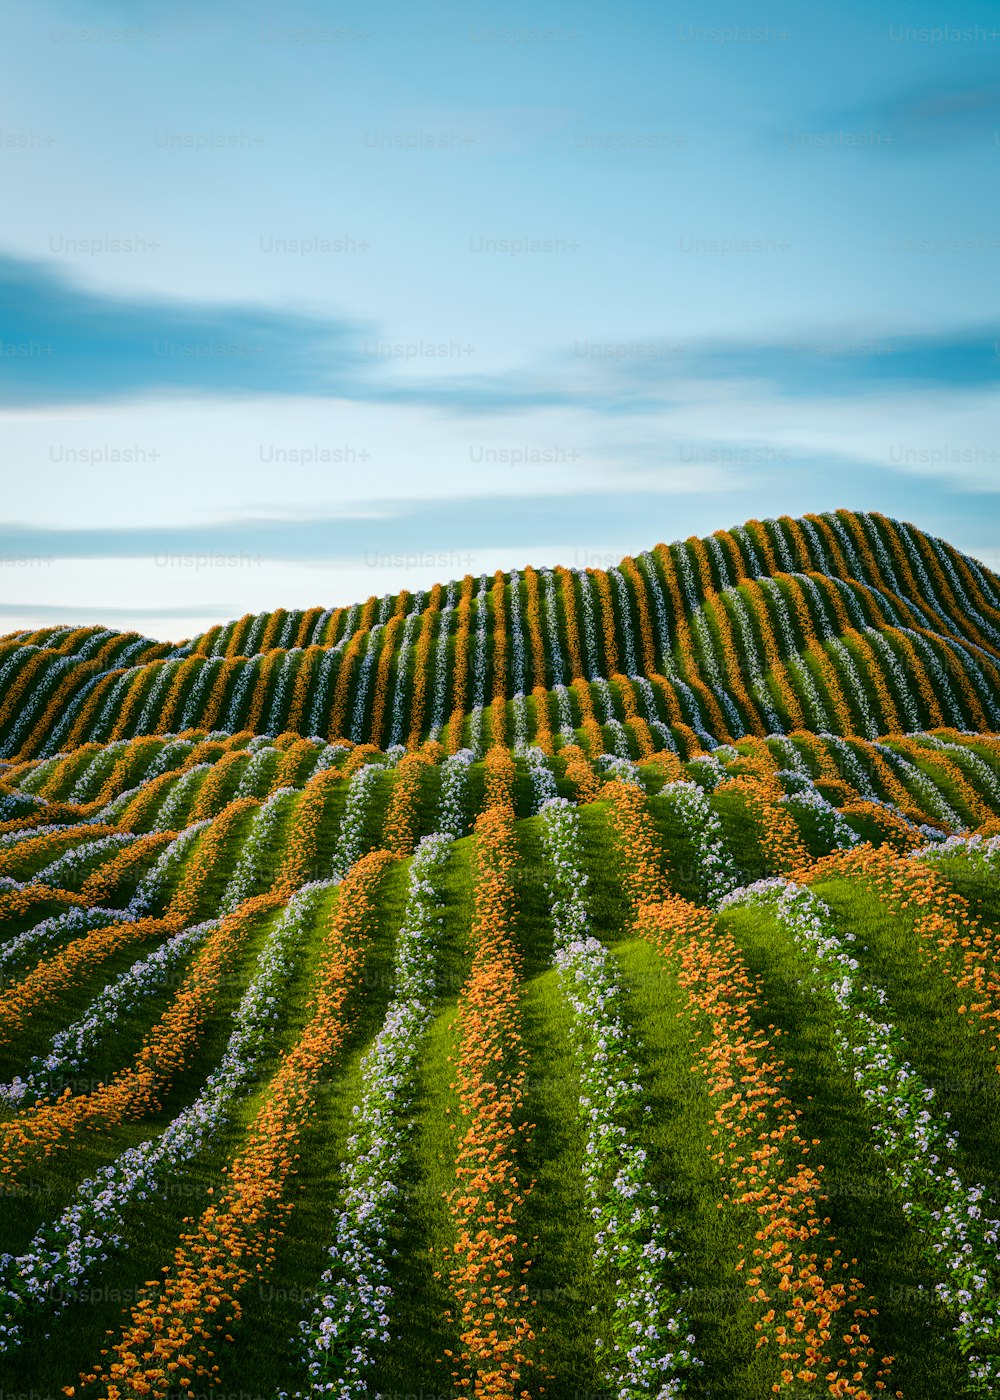 a field of flowers with a hill in the background